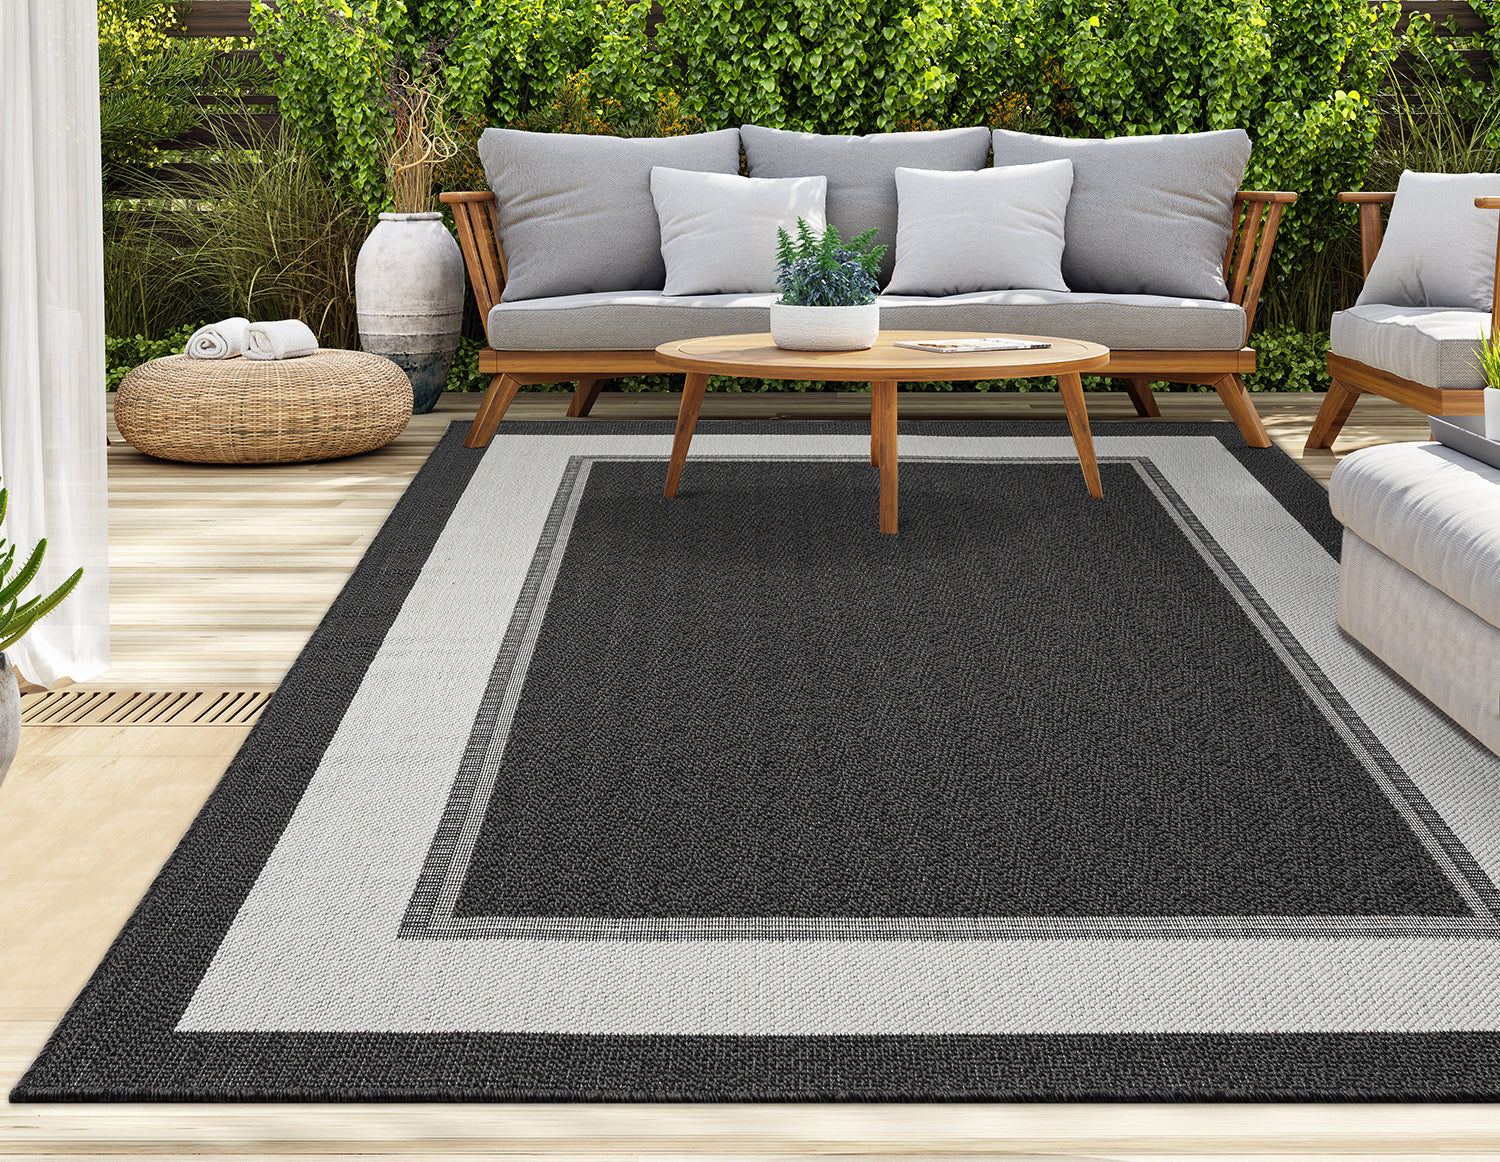 Outdoor Rugs Rectangular Collection Anthracite Cream